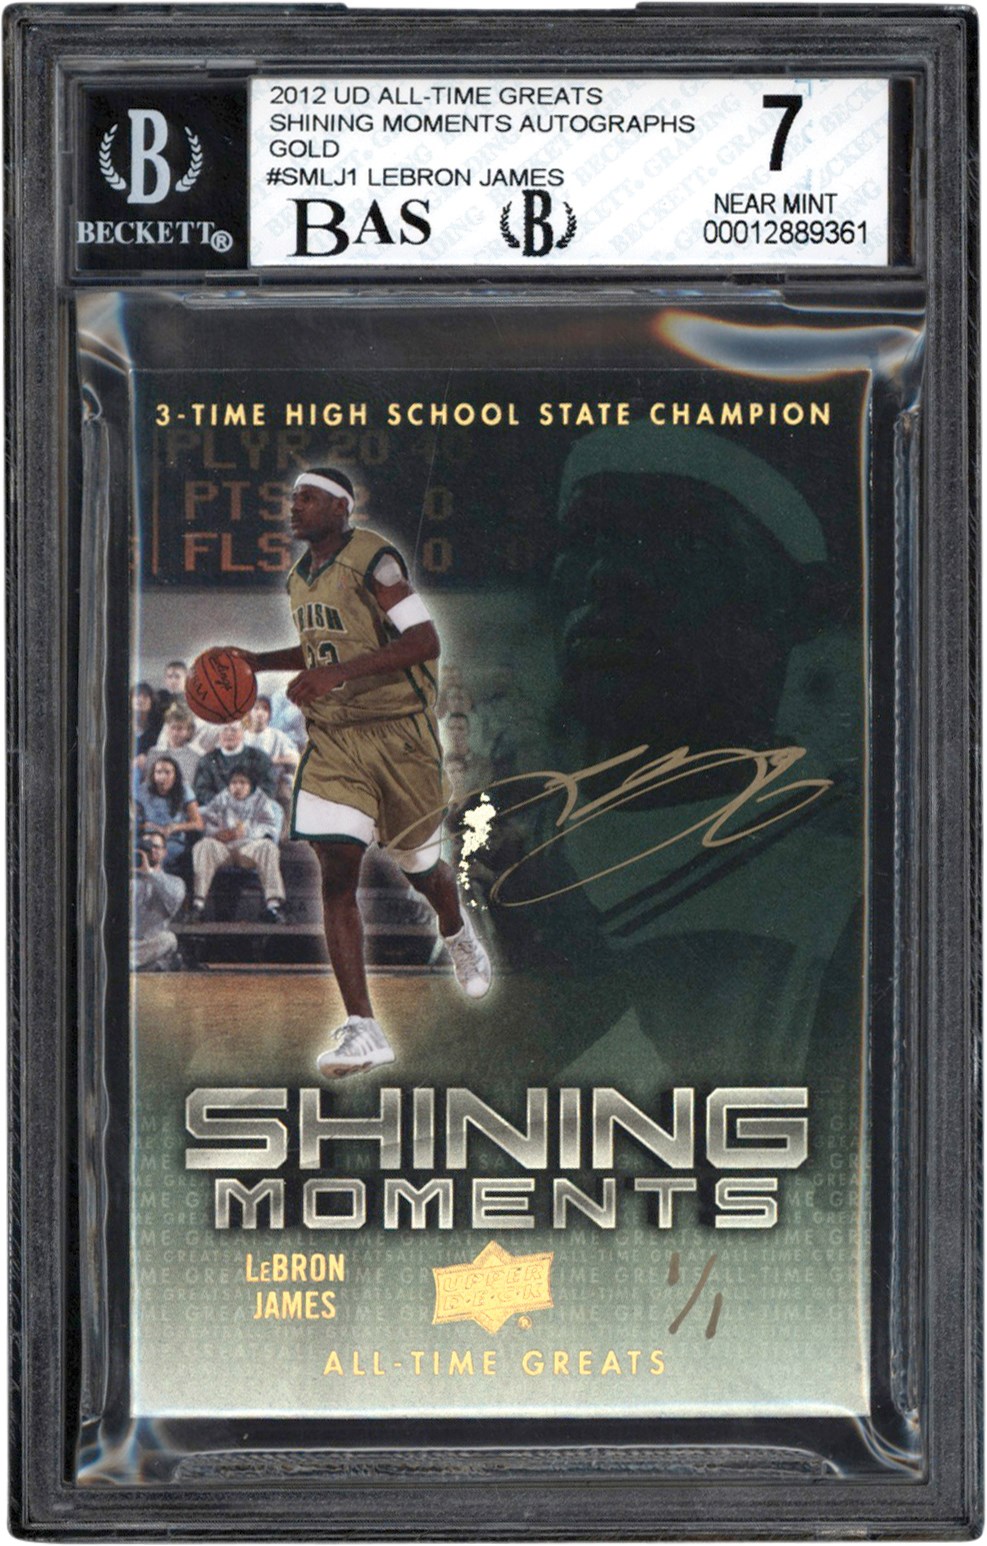 Basketball Cards - 2012 UD All-Time Greats Basketball Shining Moments Autographs Gold #SMLJ1 LeBron James Autograph #1/1 BAS NM 7 Auto 8